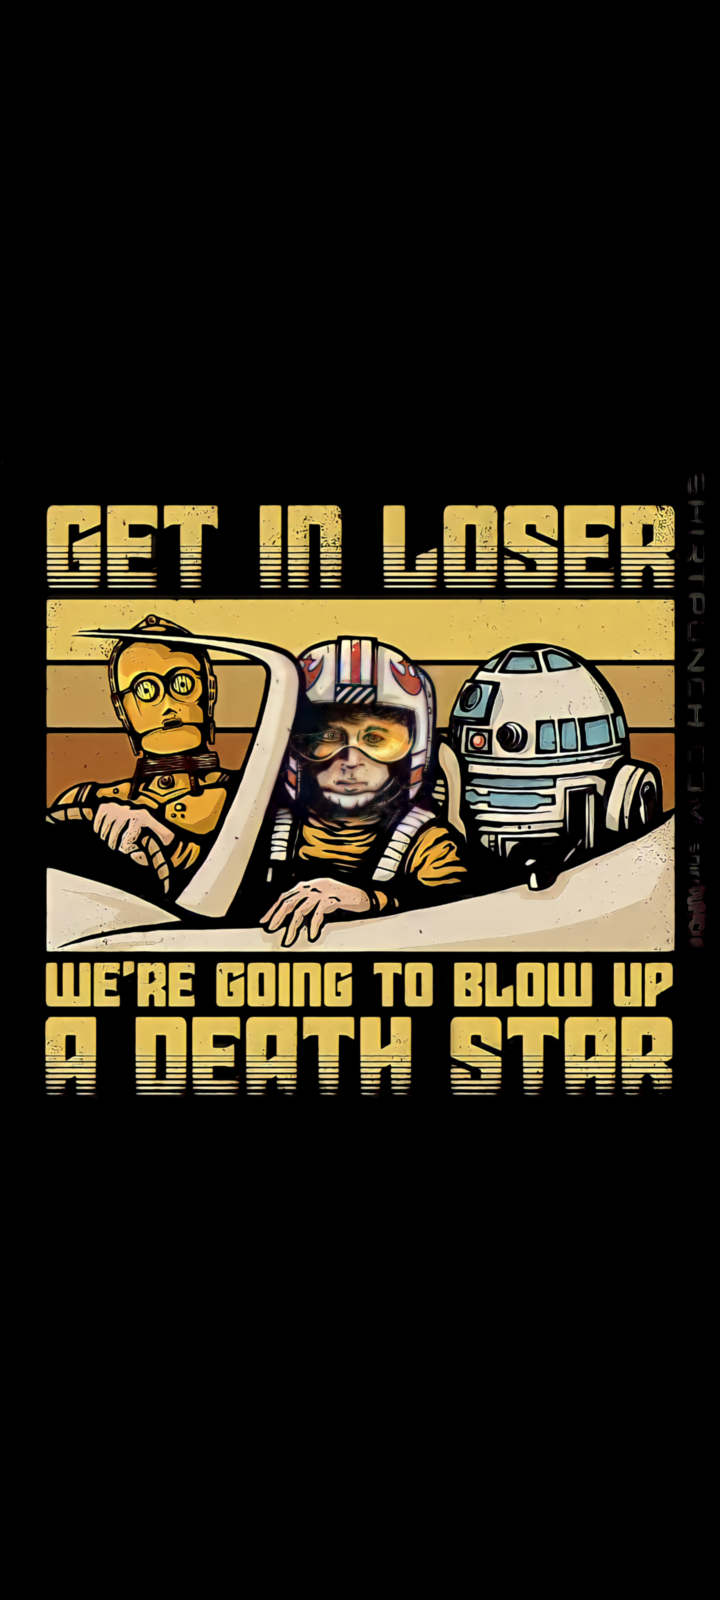 …. We’re Going to Blow Up a Death Star!